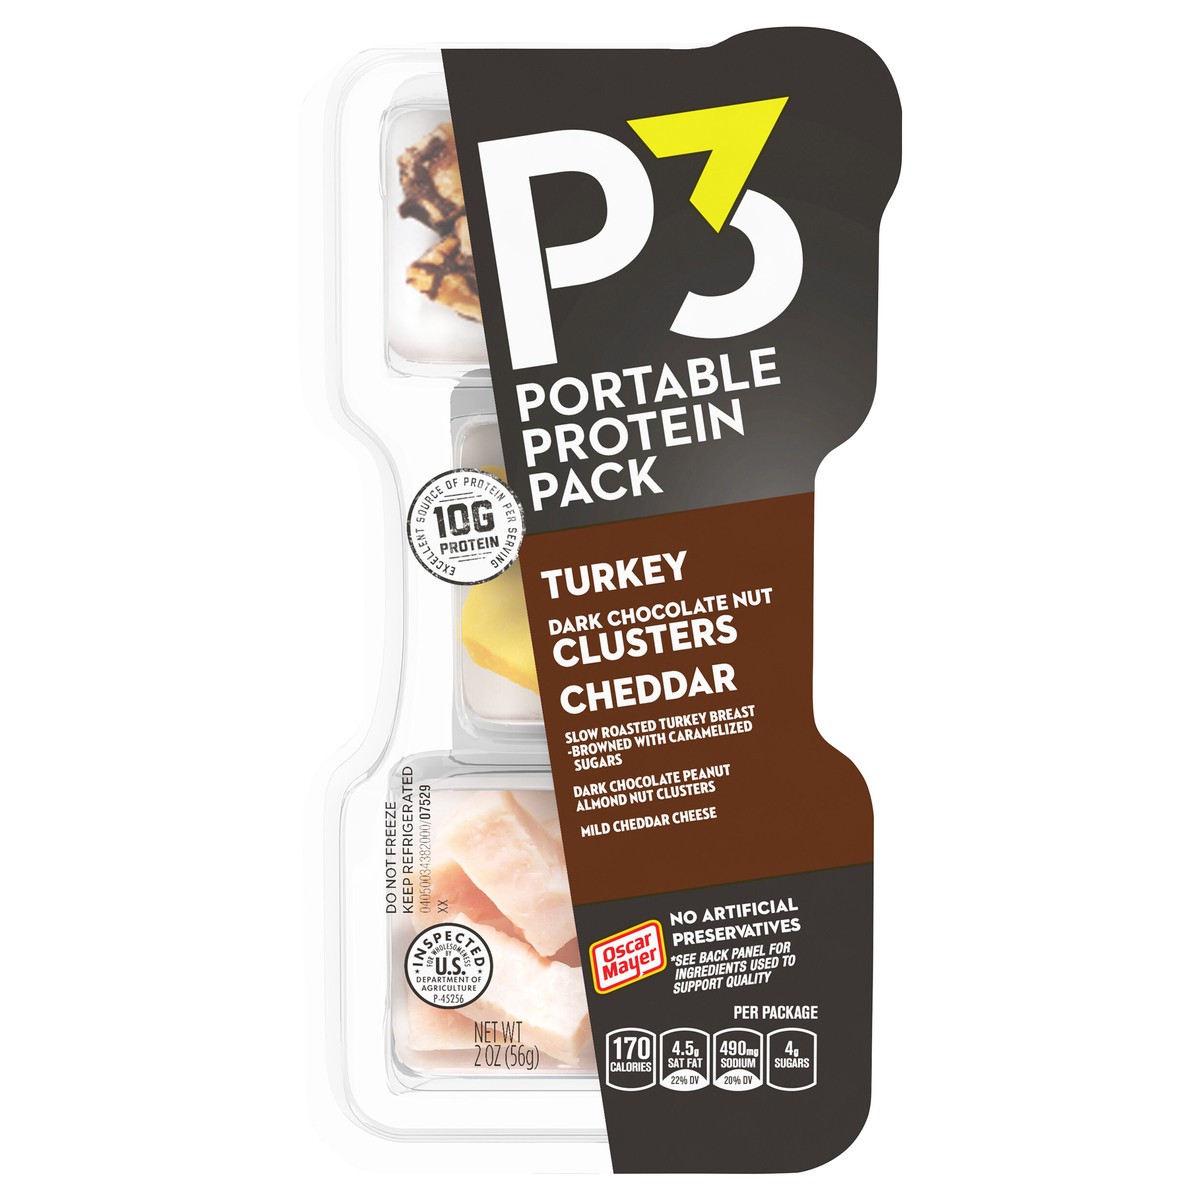 slide 1 of 9, P3 Portable Protein Pack Portable Protein Snack Pack with Dark Chocolate Almond Nut Clusters, Turkey & Cheddar Cheese - 2oz, 2 oz